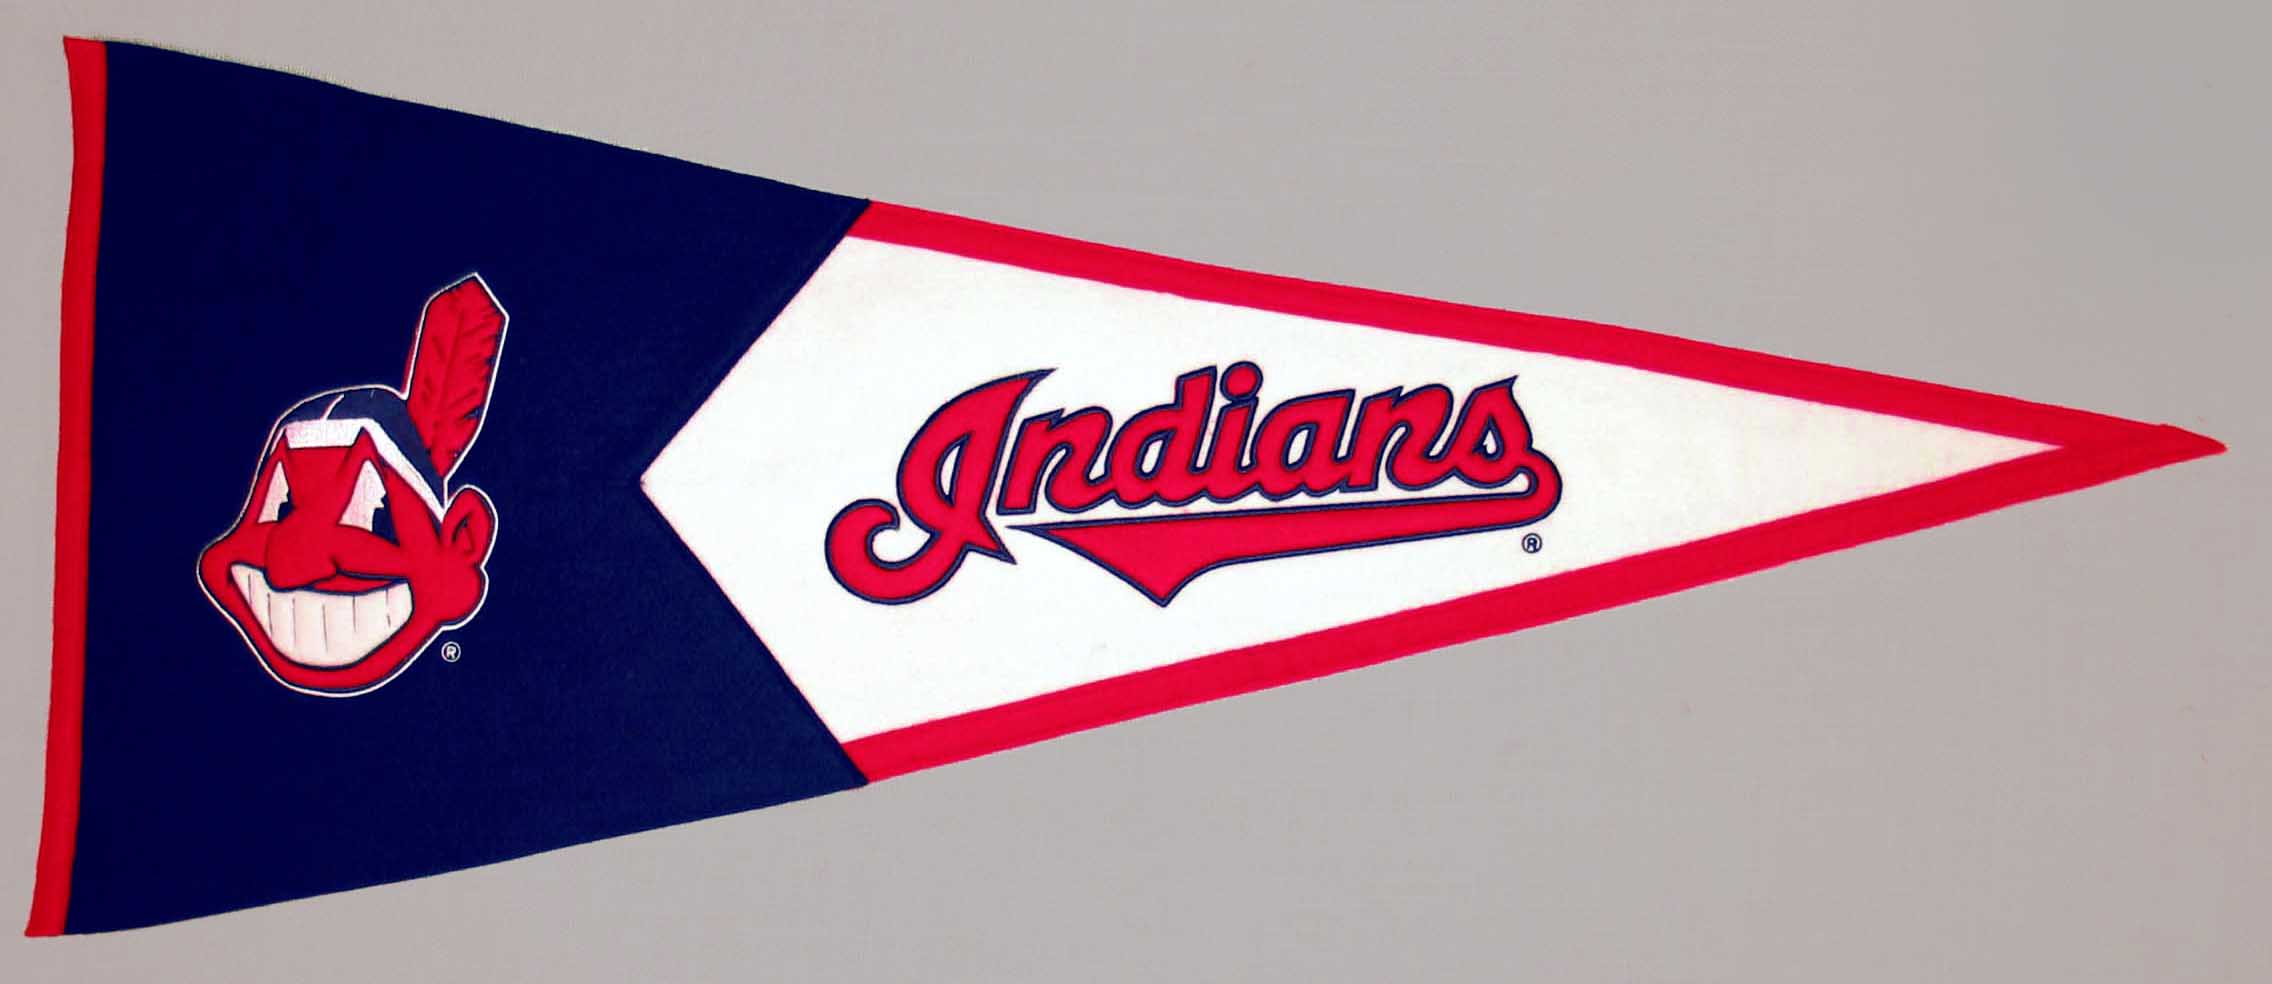 10+ Cleveland Indians HD Wallpapers and Backgrounds